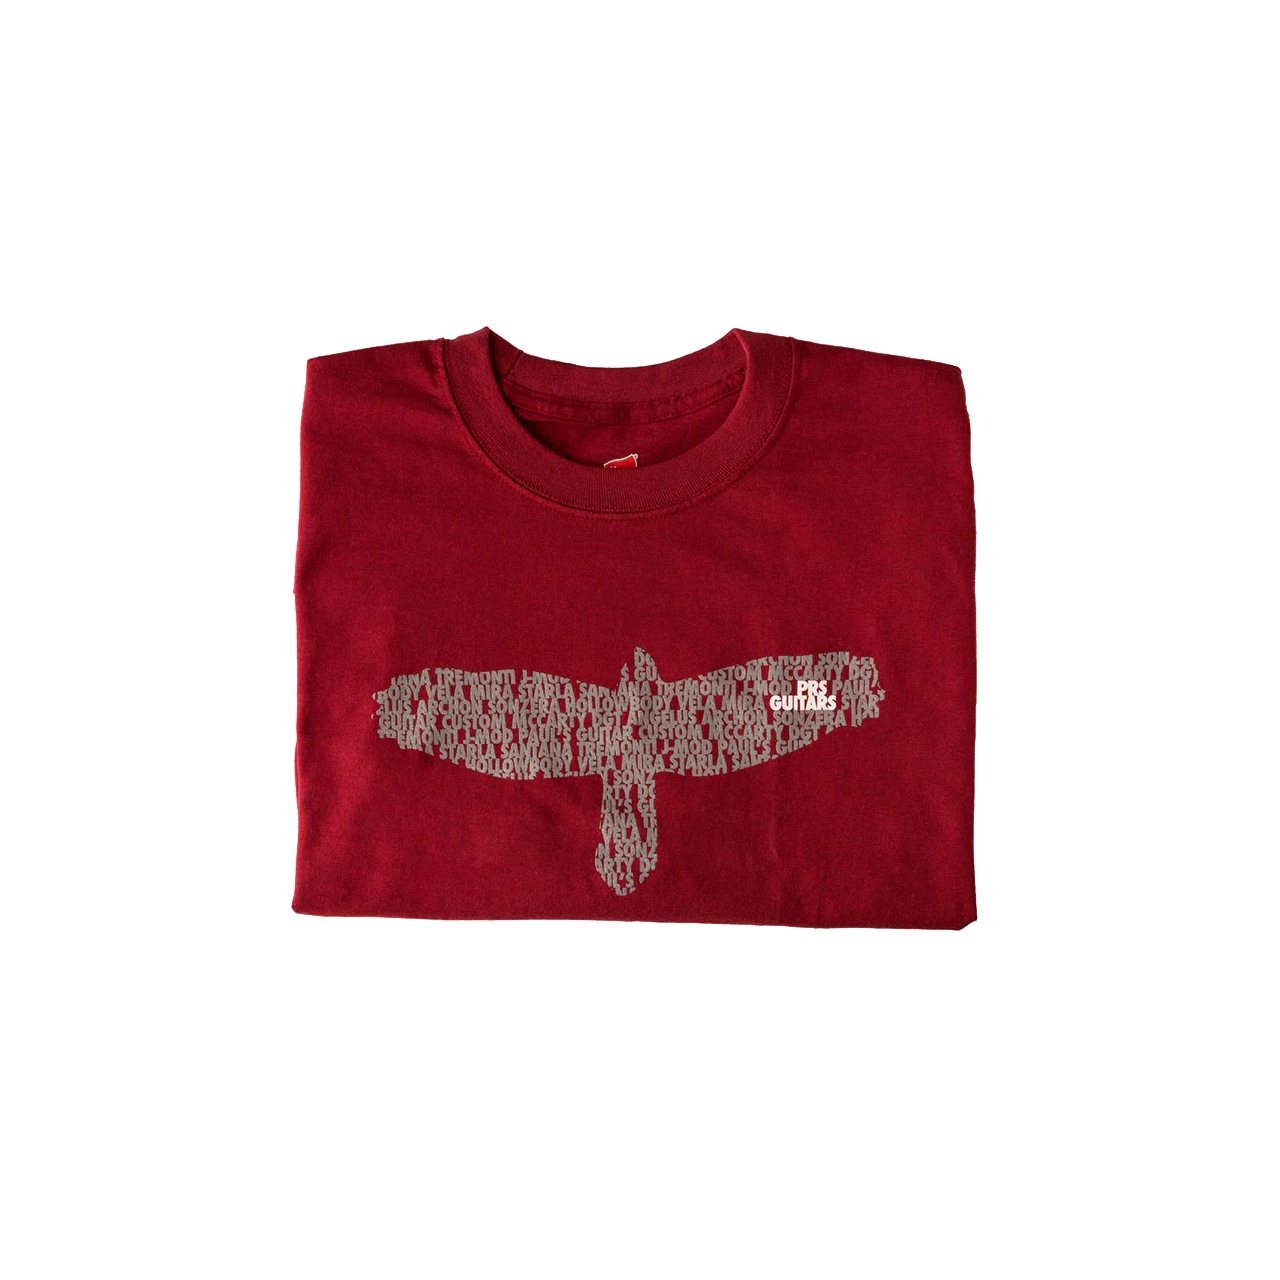 PRS "Bird as a Word" Tee | Oxblood Red - Large